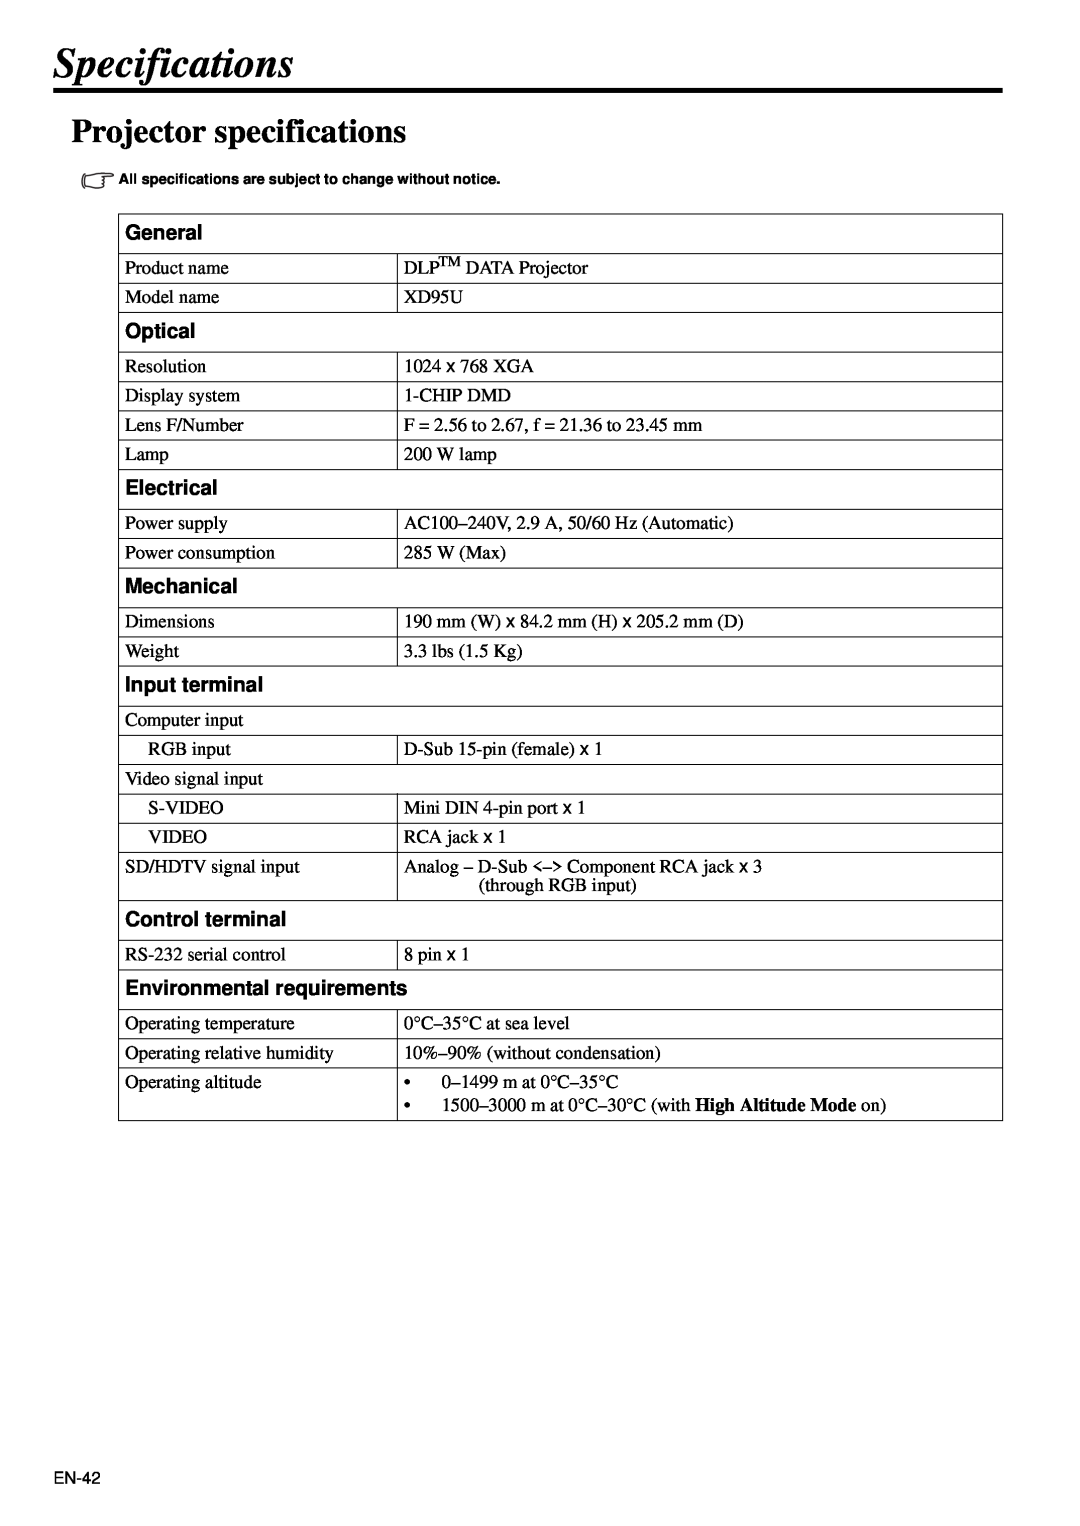 Mitsubishi Electronics XD95U user manual Specifications, Projector specifications 